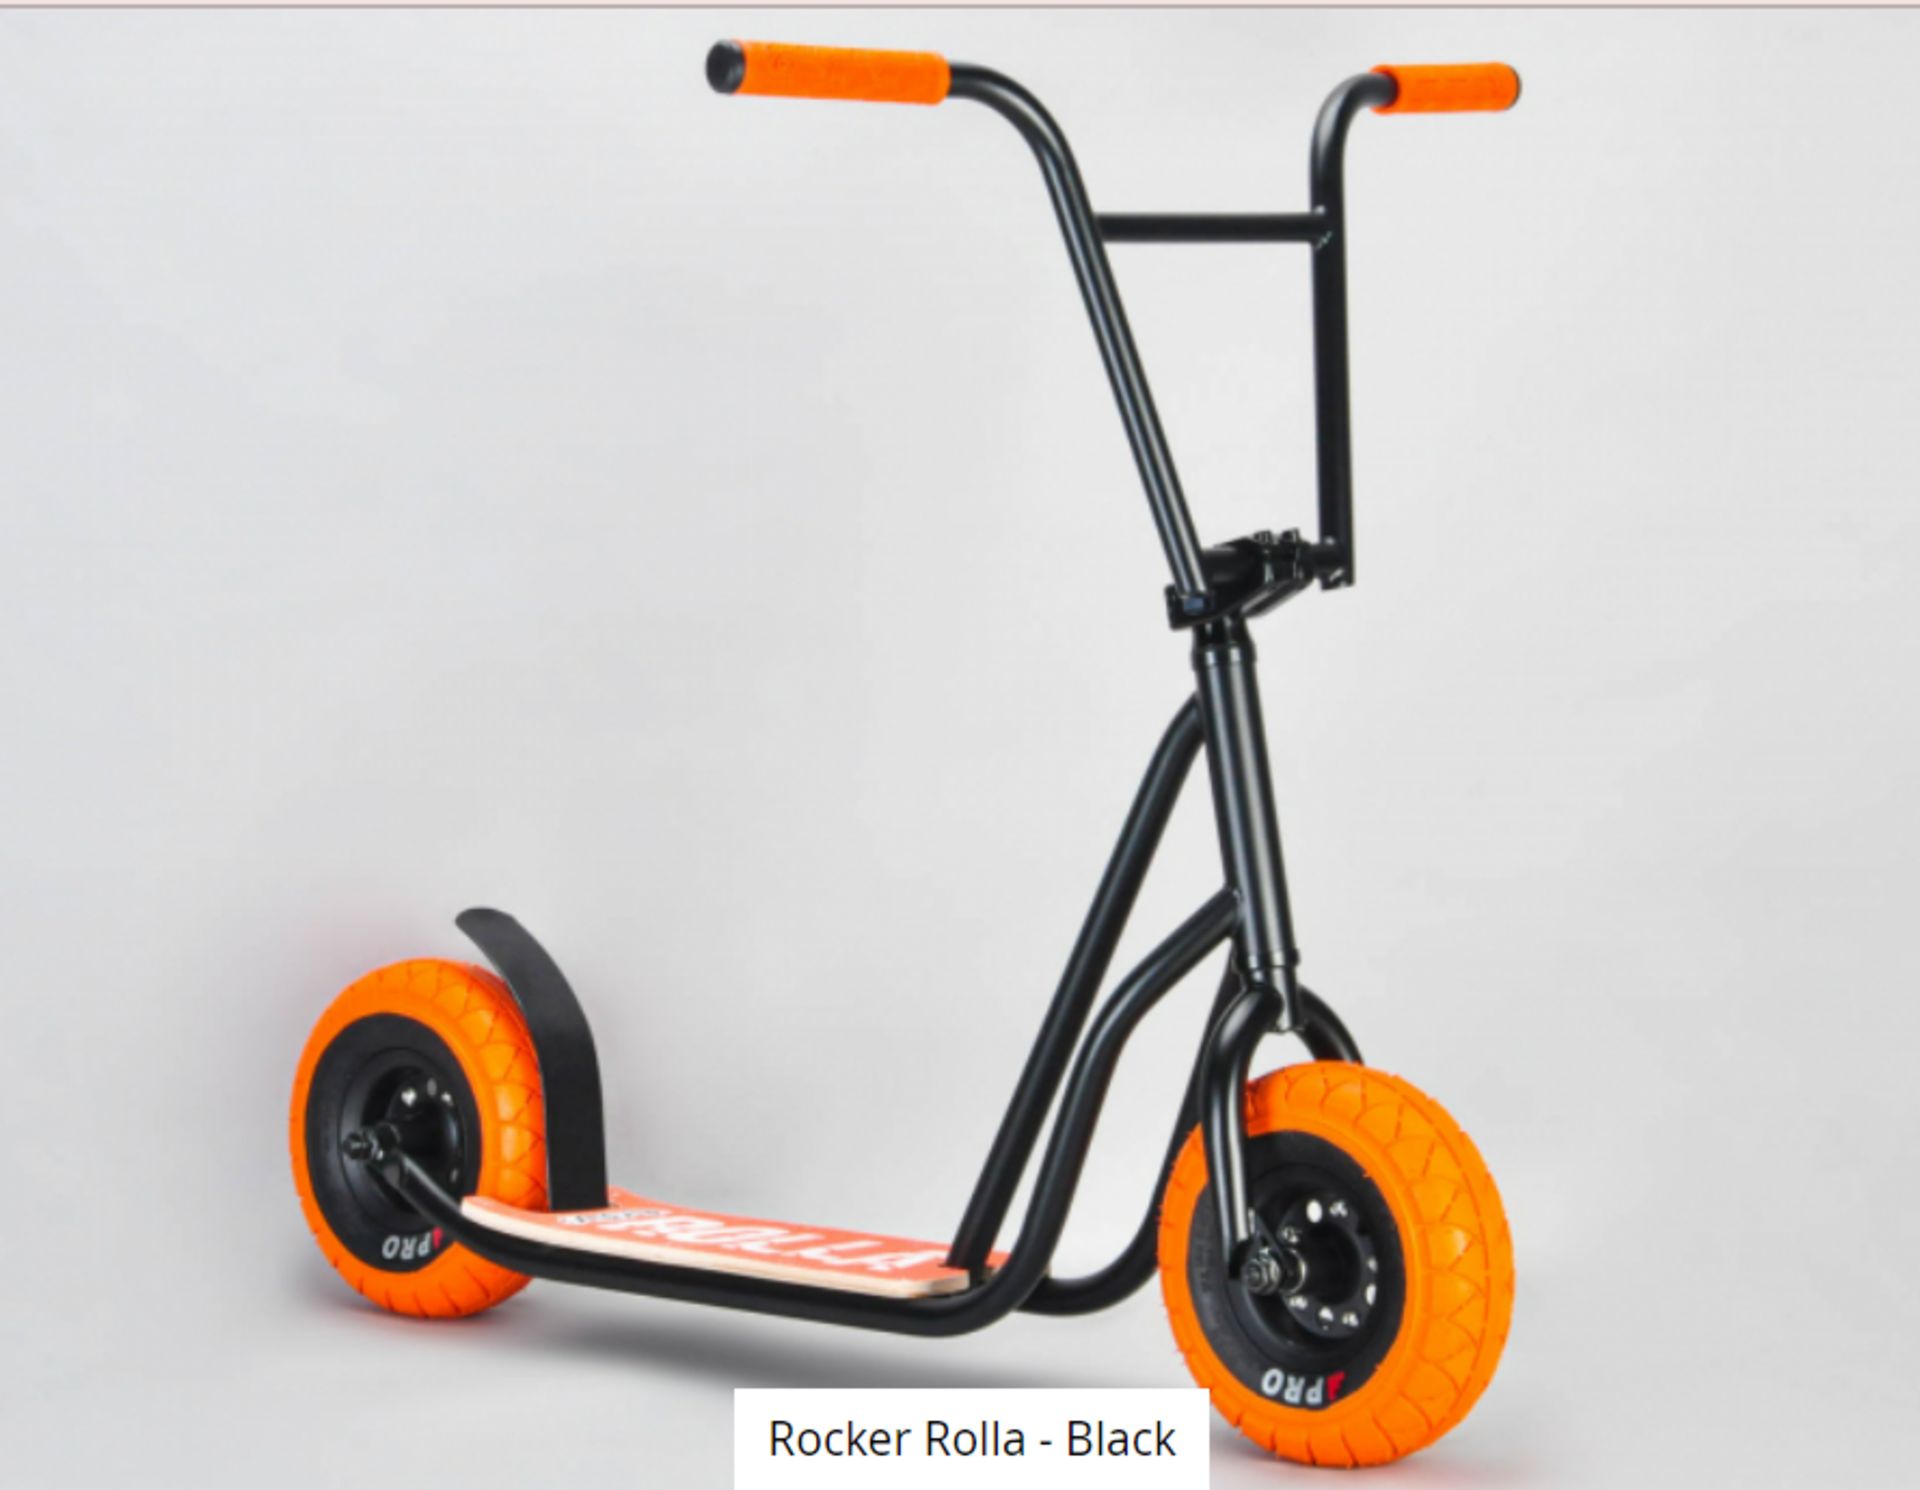 BRAND NEW Rocker Rolla Scooter - Black - Image 8 of 9